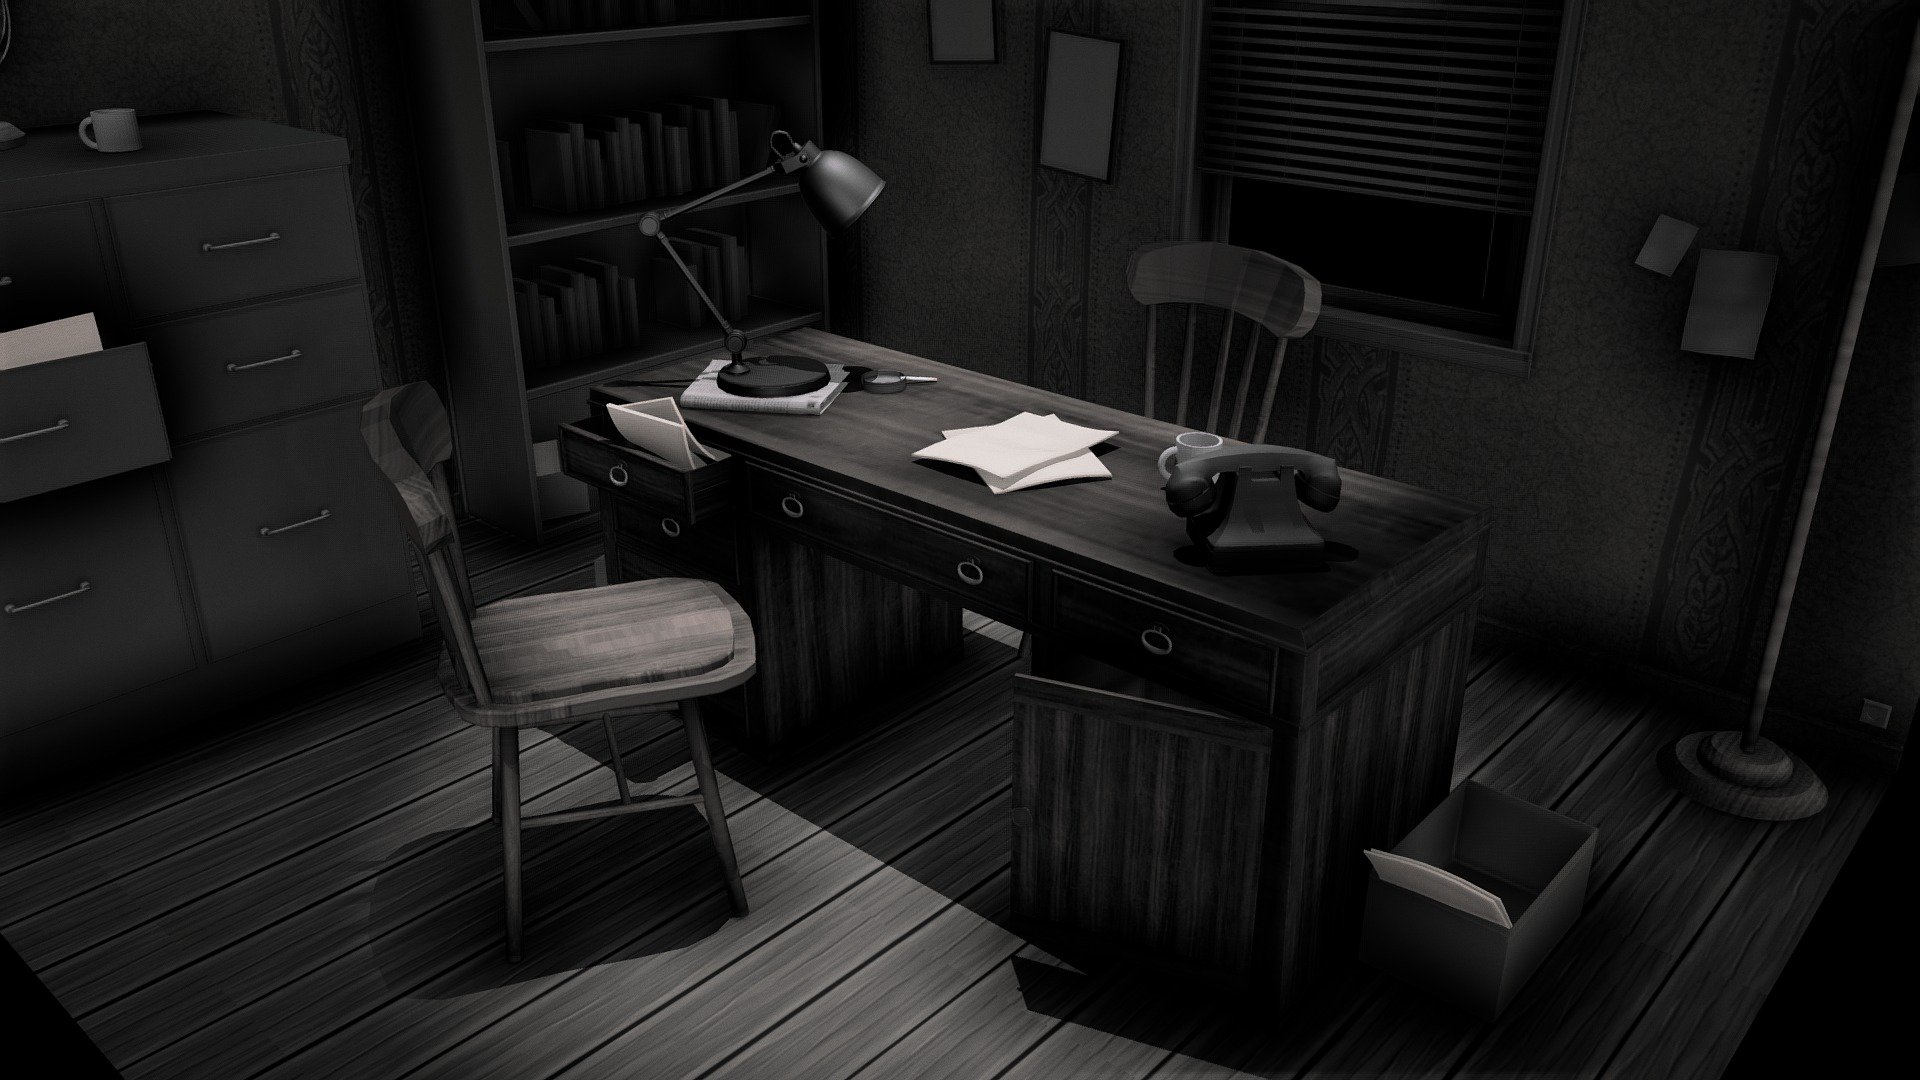 Small scene of a detective office in a film noir style

Music credits : https://www.youtube.com/watch?v=xMgt9NqZM0I - Investigator Office - Download Free 3D model by Vincent (@vboichut) 3d model